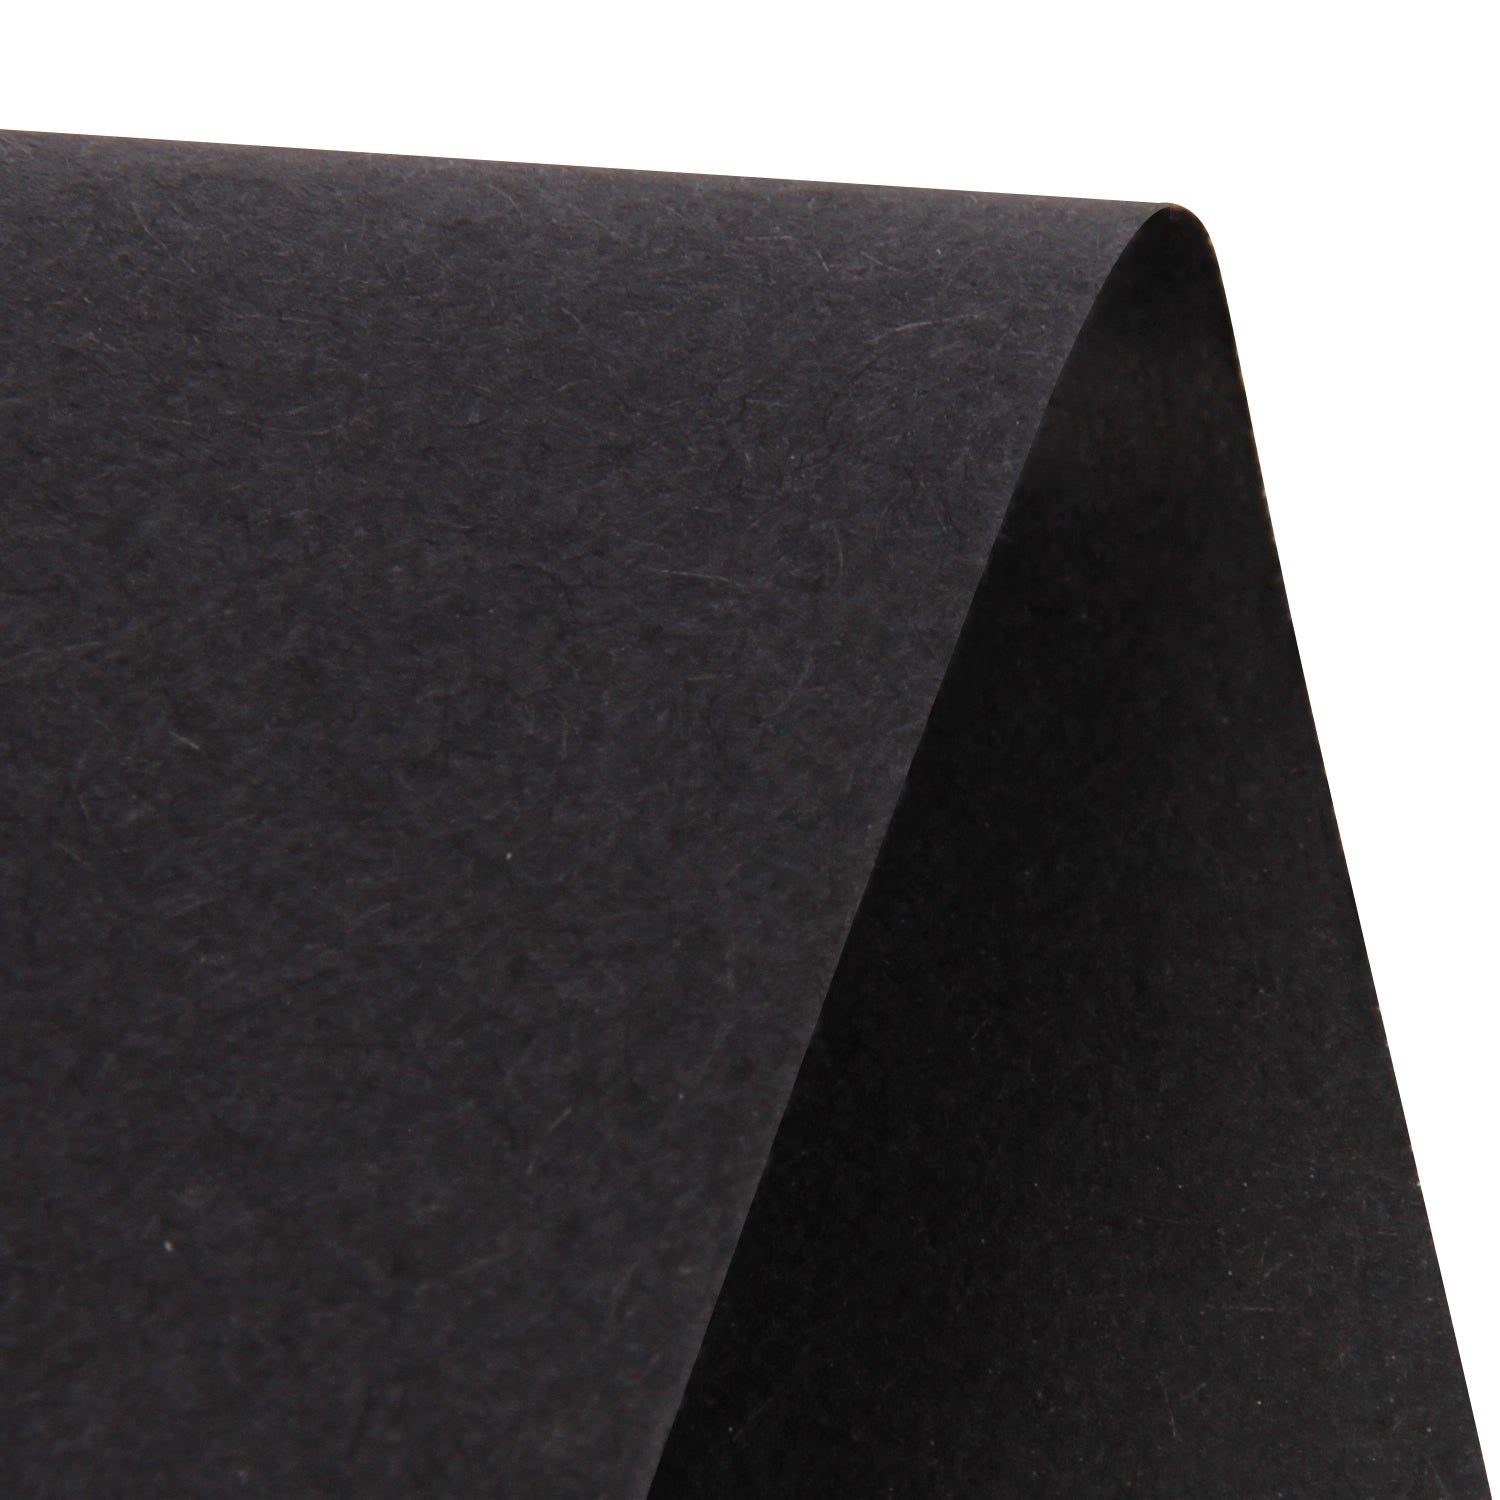 RUSPEPA Black Kraft Paper Roll - 24 inches x 100 feet - Recyclable Paper  Perfect for for Crafts, Art, Wrapping, Packing, Postal, Shipping, Dunnage 